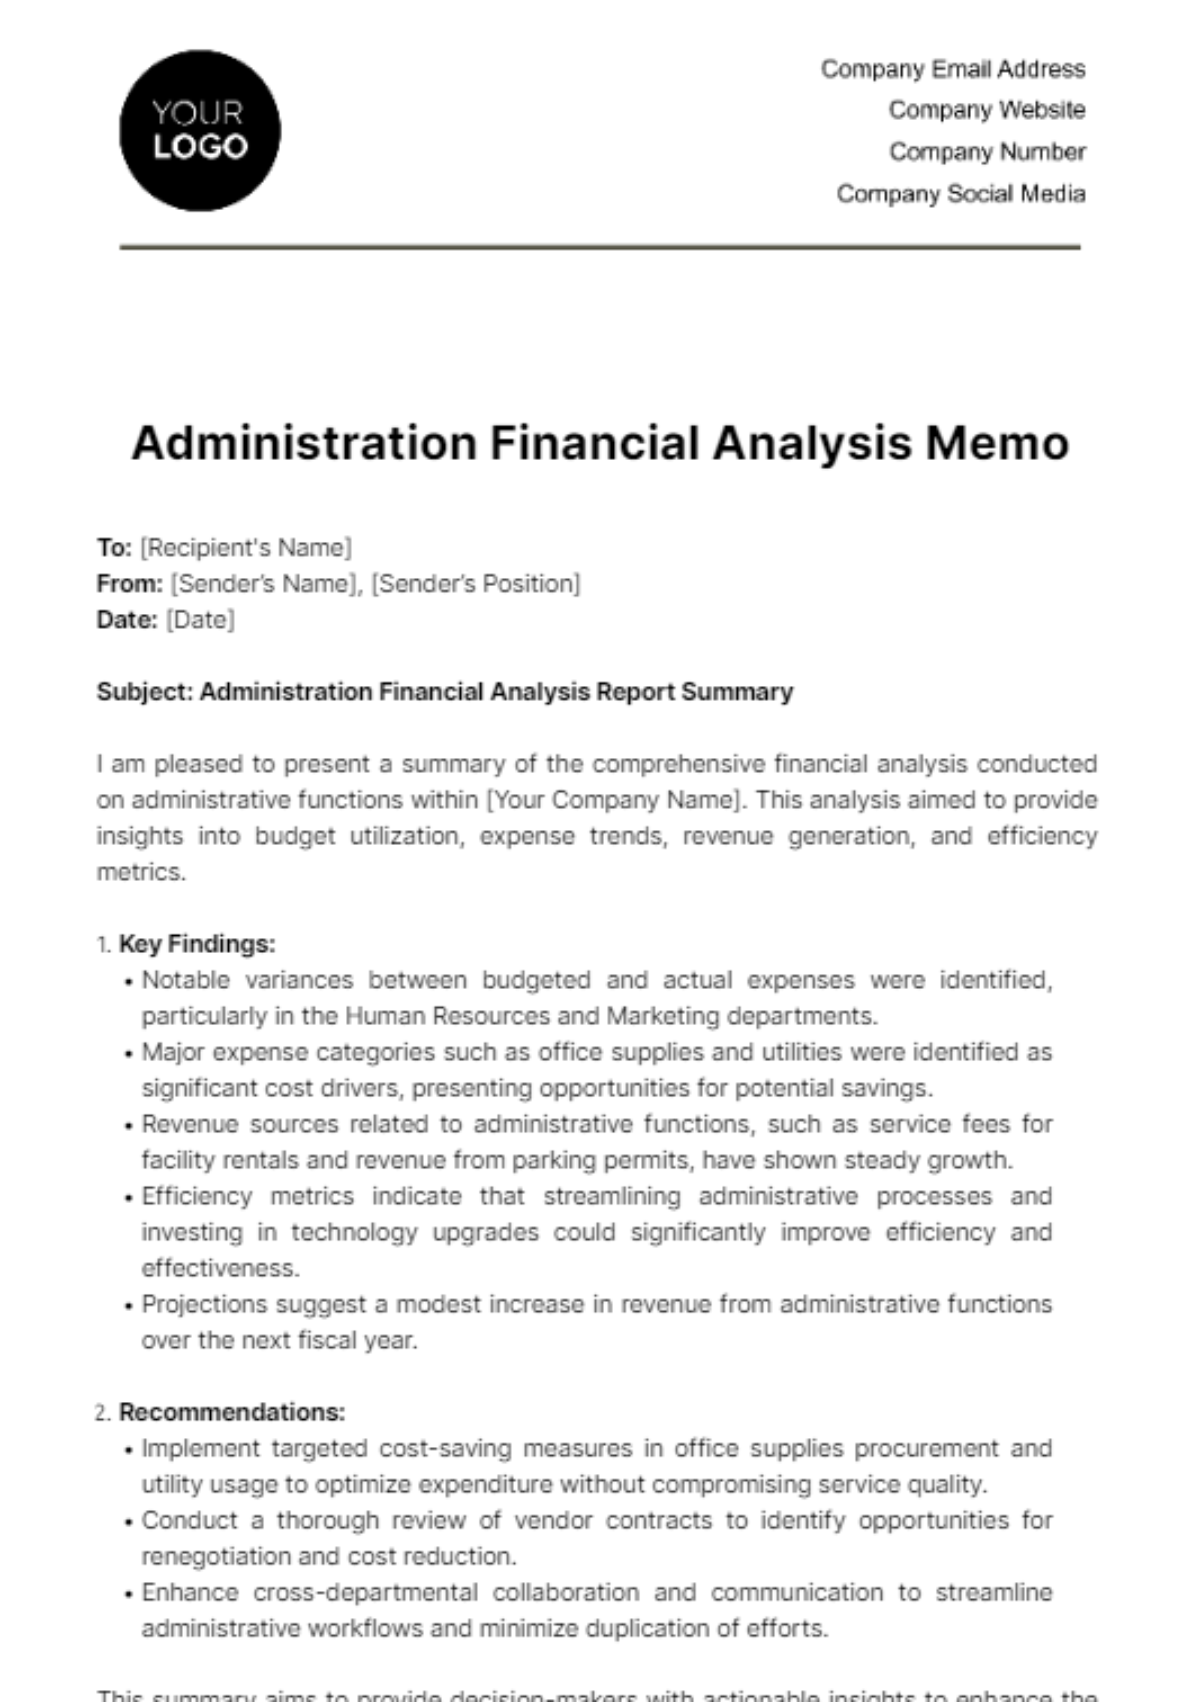 Administration Financial Analysis Memo Template